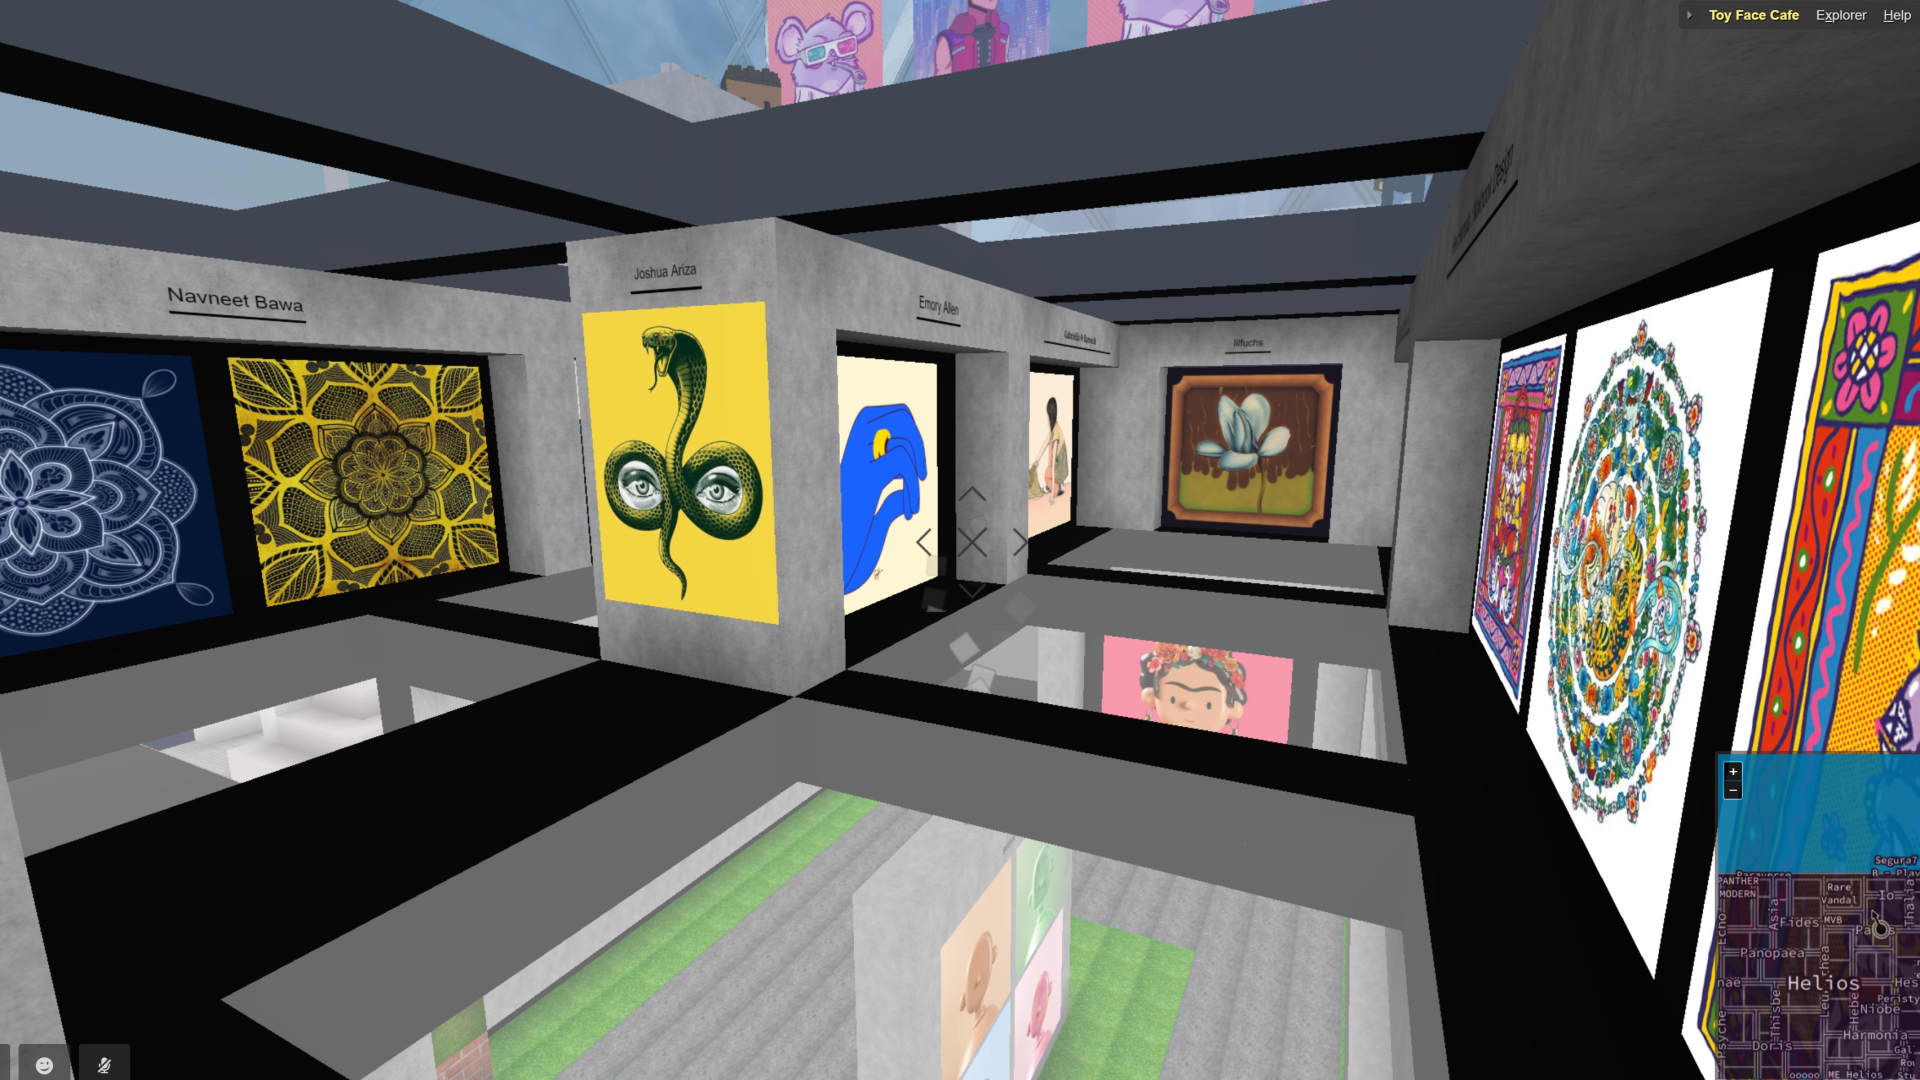 On the ground floor of the metaverse cafe, Amrit Pal Singh displays the art he created, and on the other floors, he displays the art that he has collected.